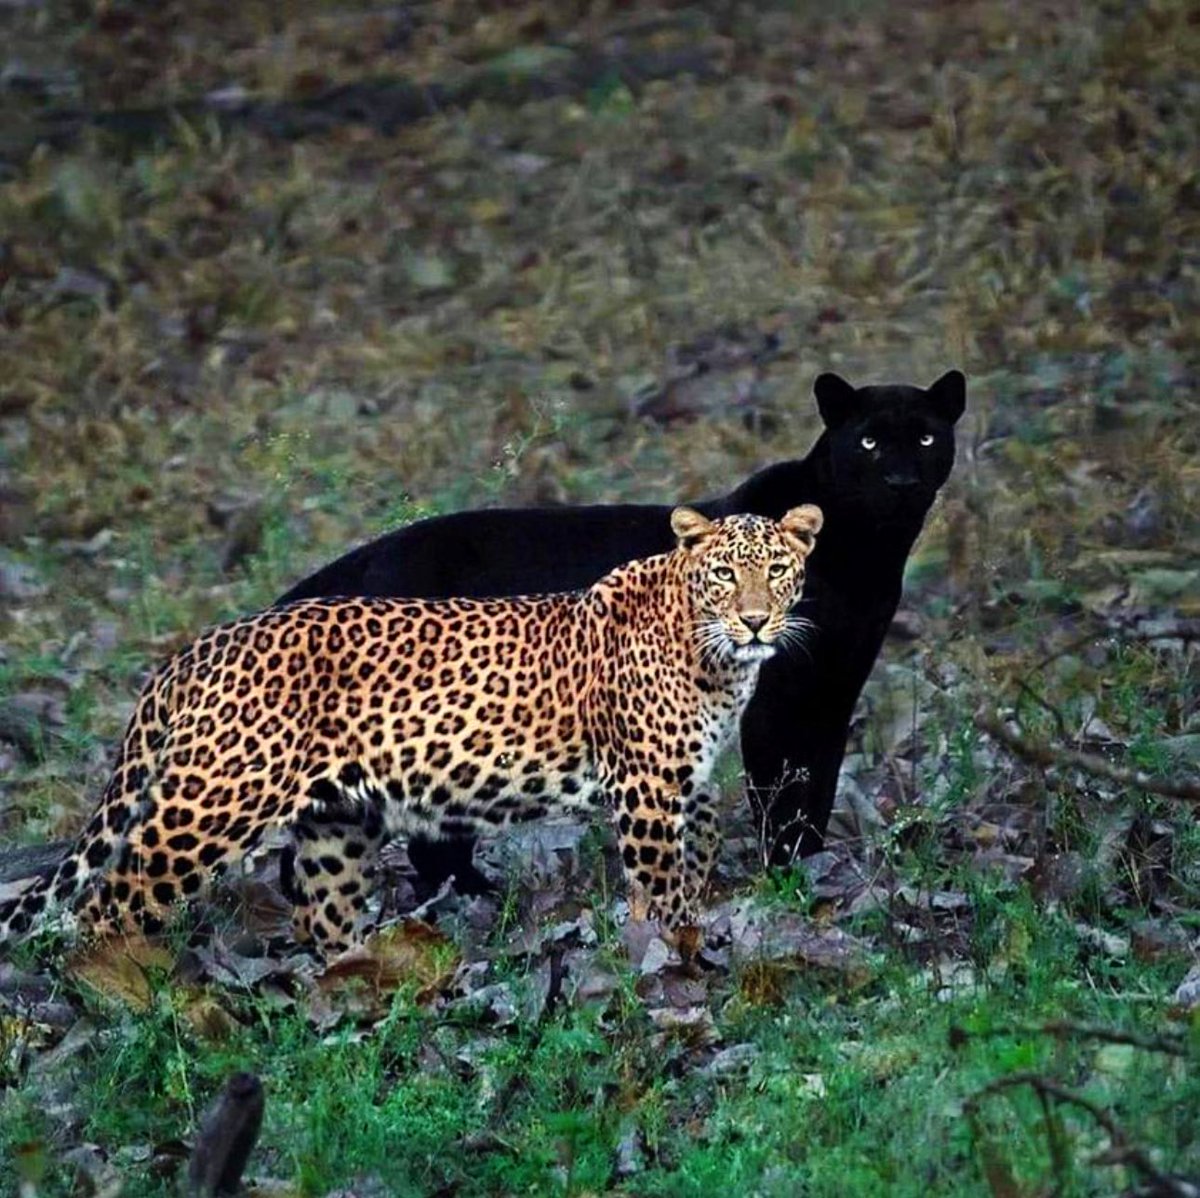 ‘The eternal couple’ Isn’t it amazing?? 😻🤩 The pair is photographed in the perfect position, as if the panther is the leopard's shadow 🐈 🐈‍⬛